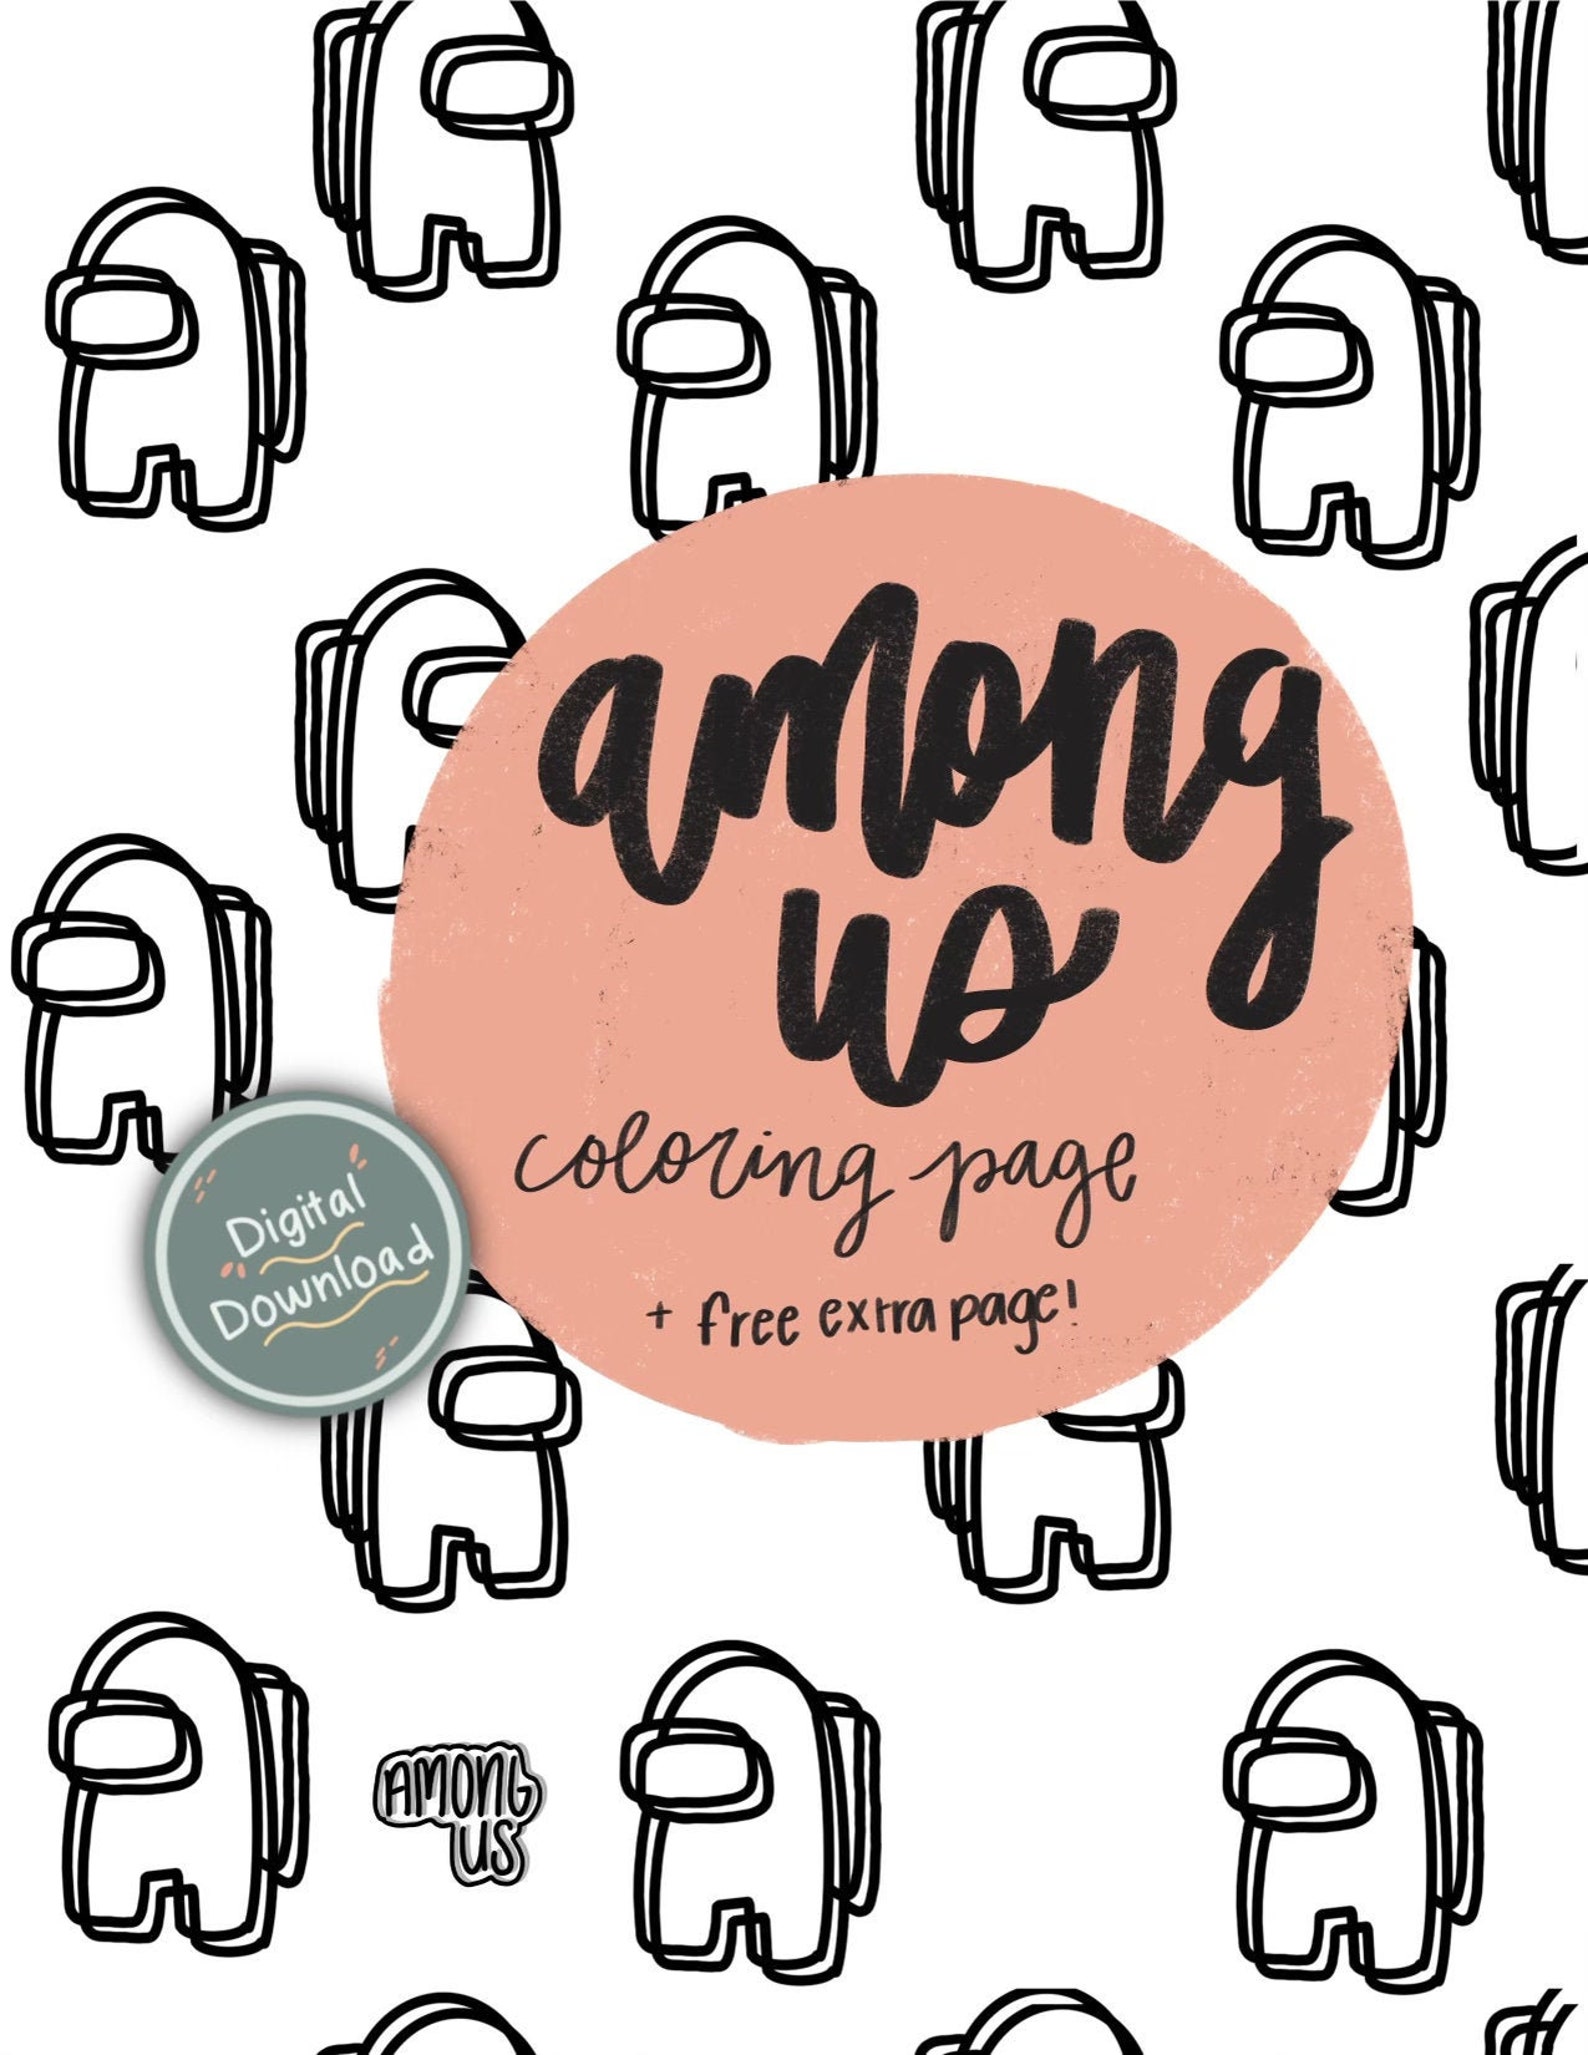 Download Among Us Coloring Page instant download .pdf | Etsy